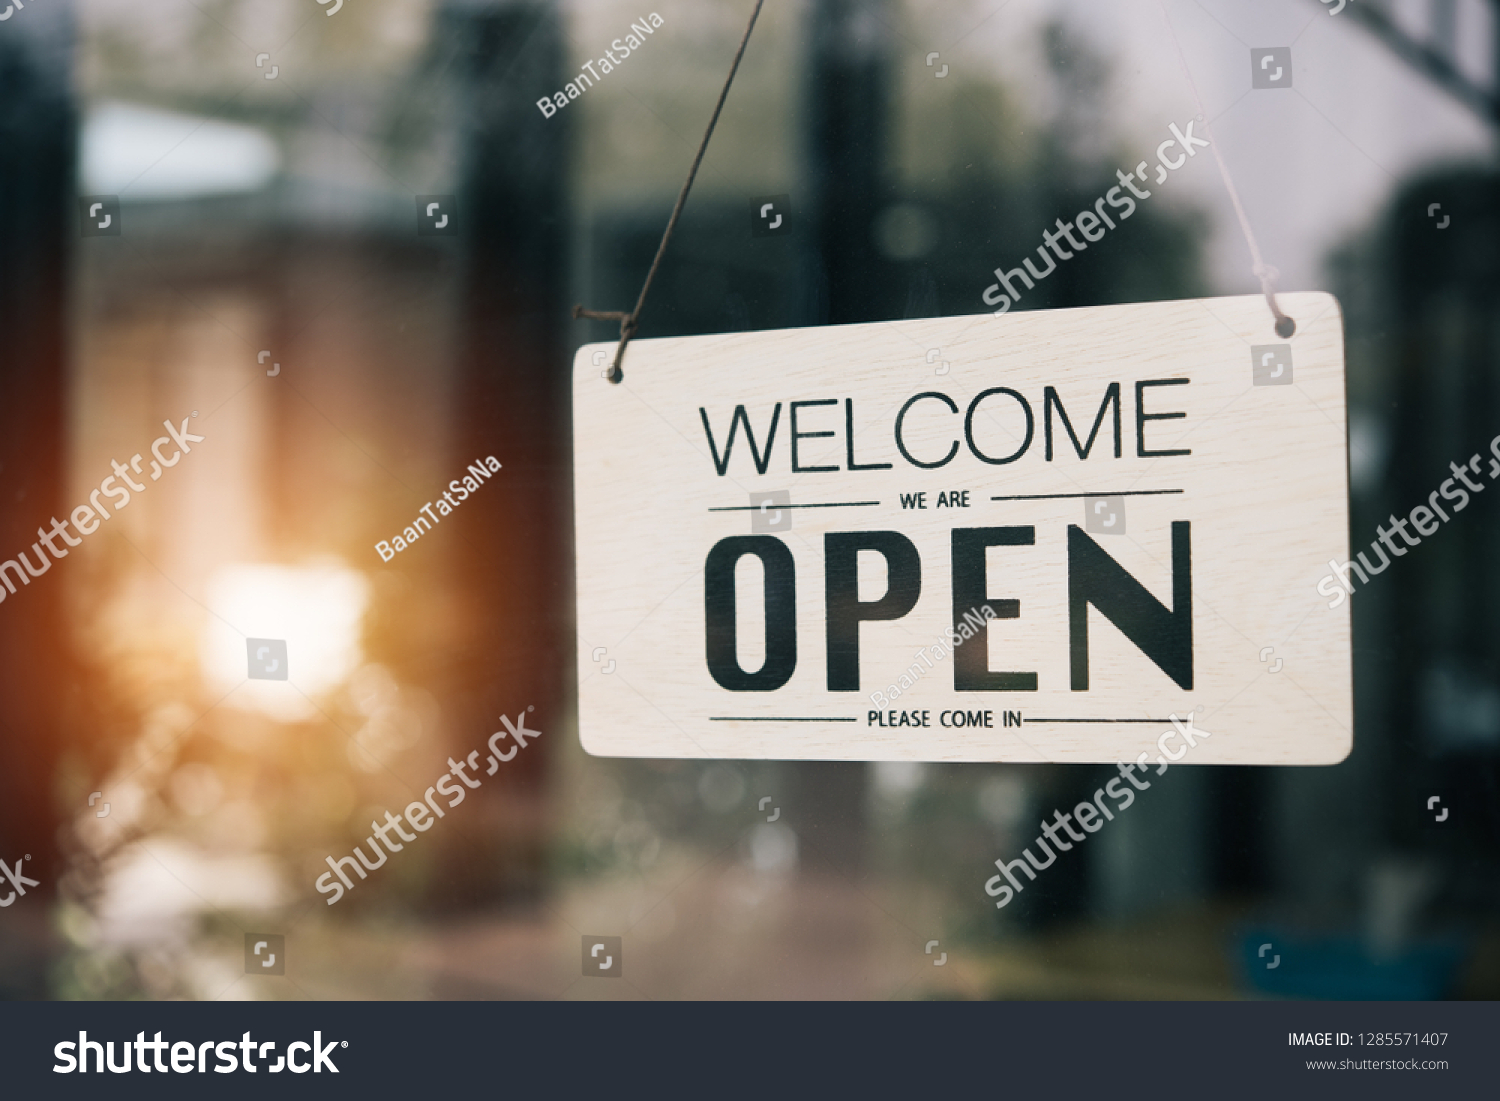 "Open" on cafe or restaurant hang on door at entrance. #1285571407